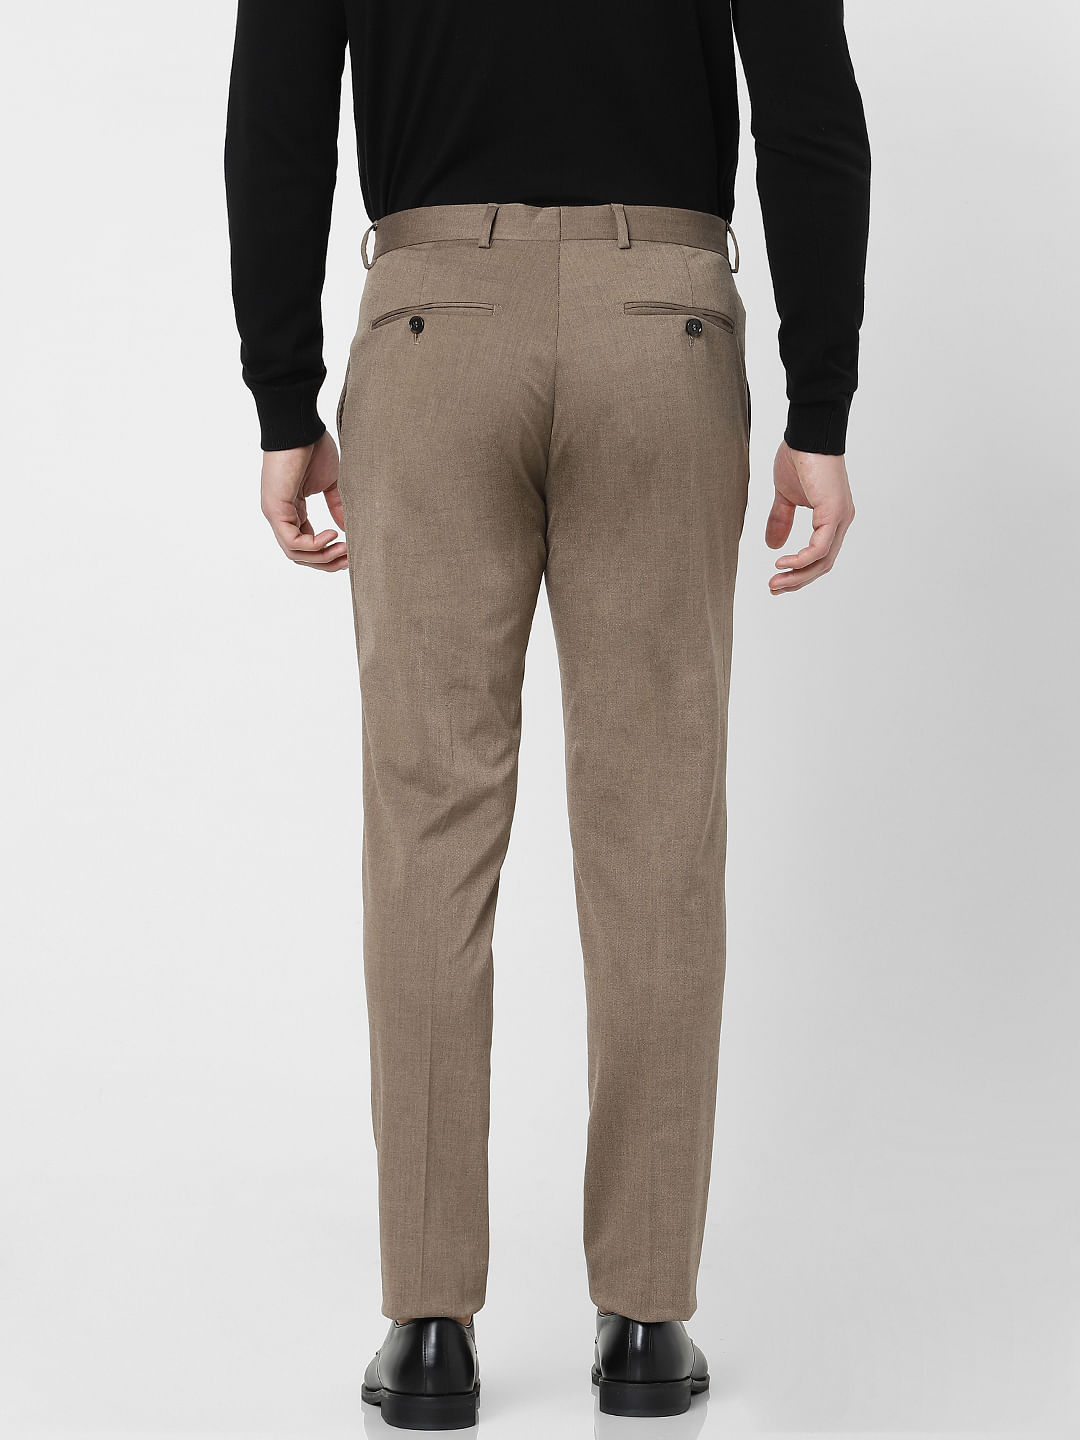 Buy Trousers For Men | Casual Pants For Men Online In India